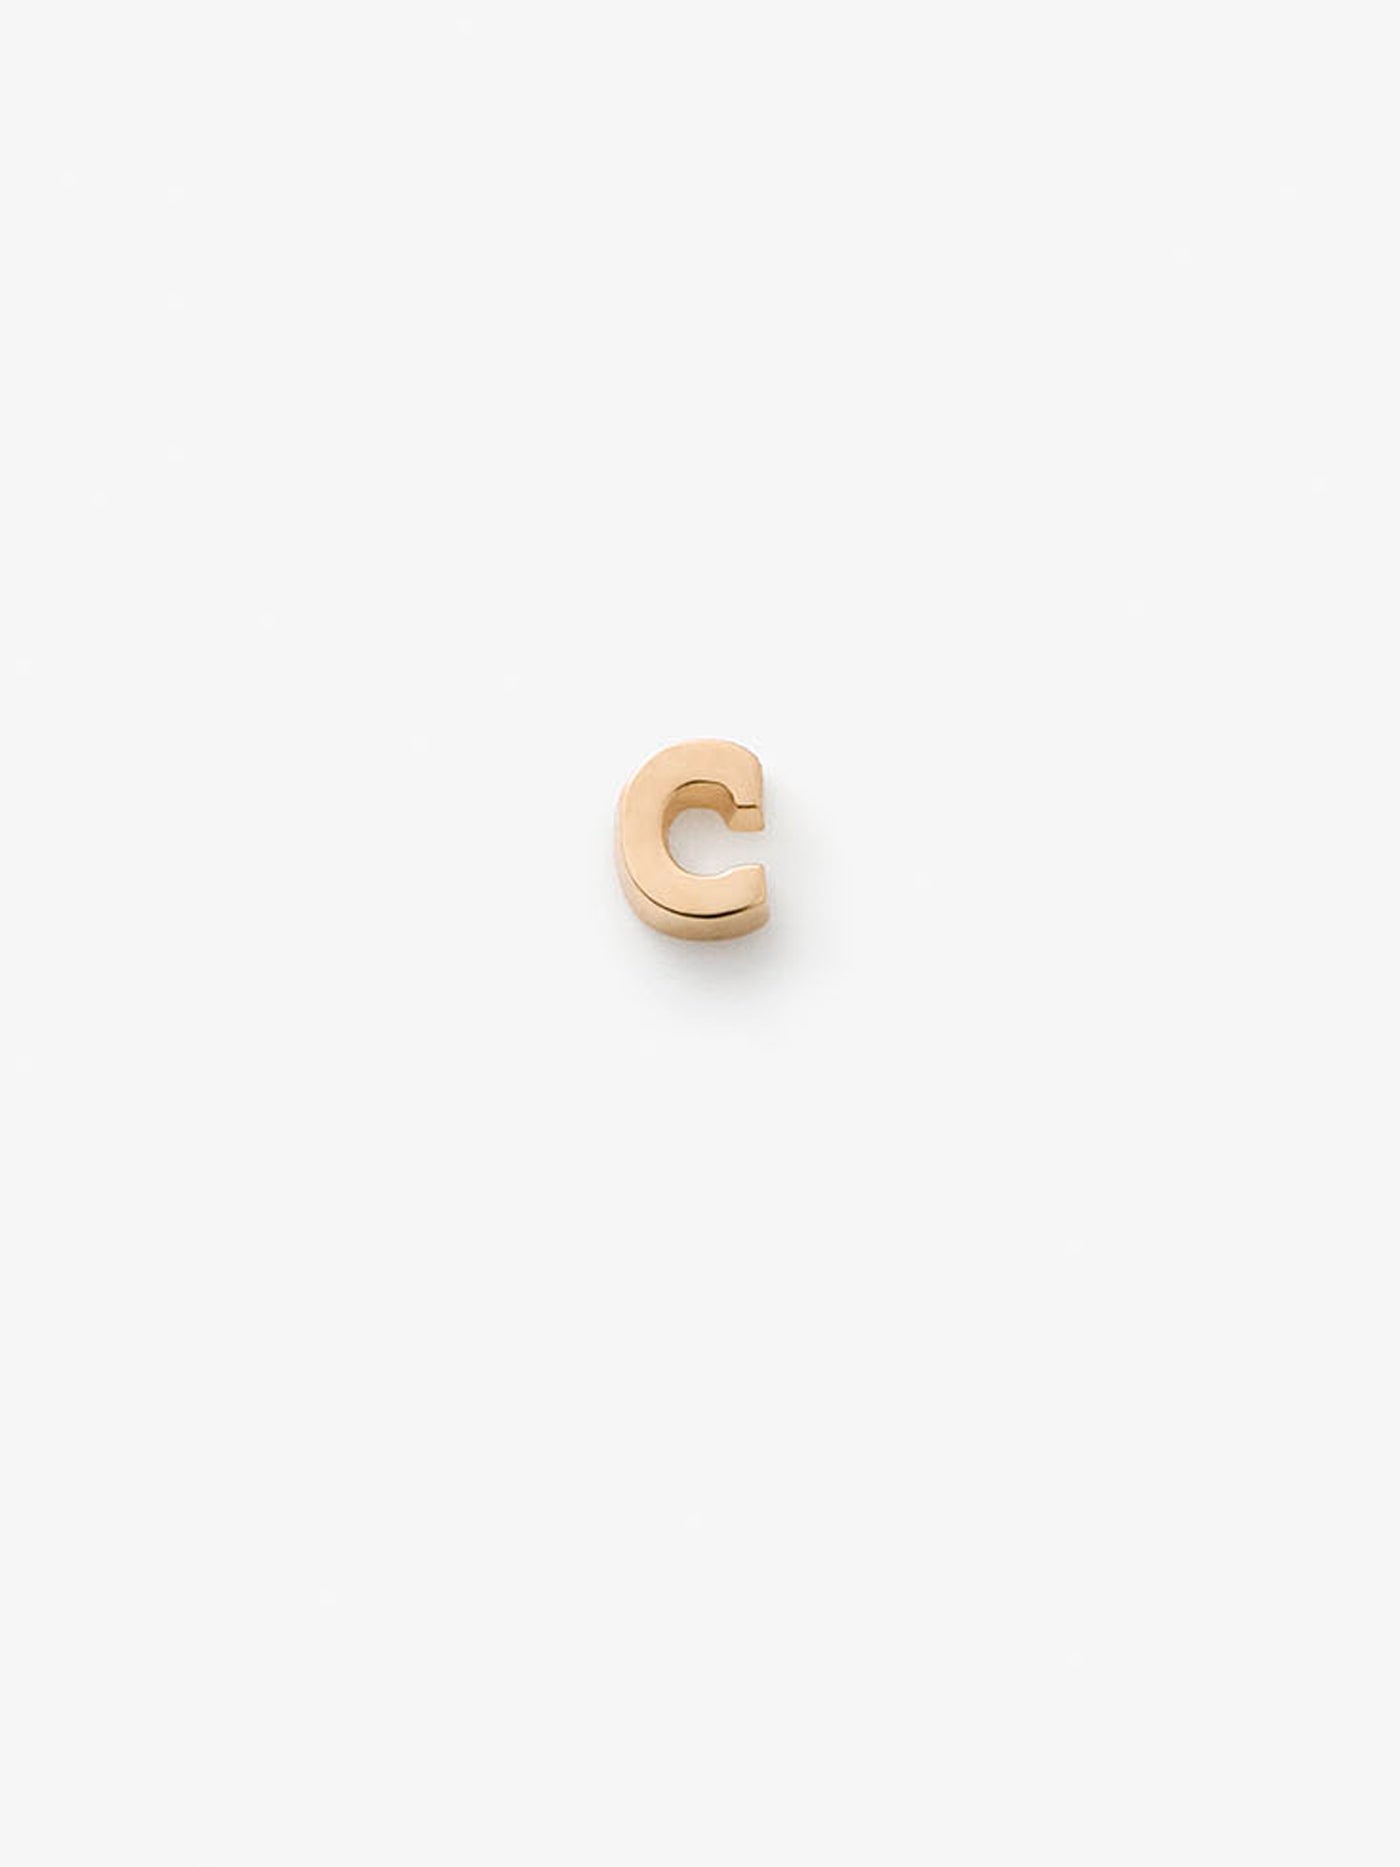 One Letter C in 18k Gold